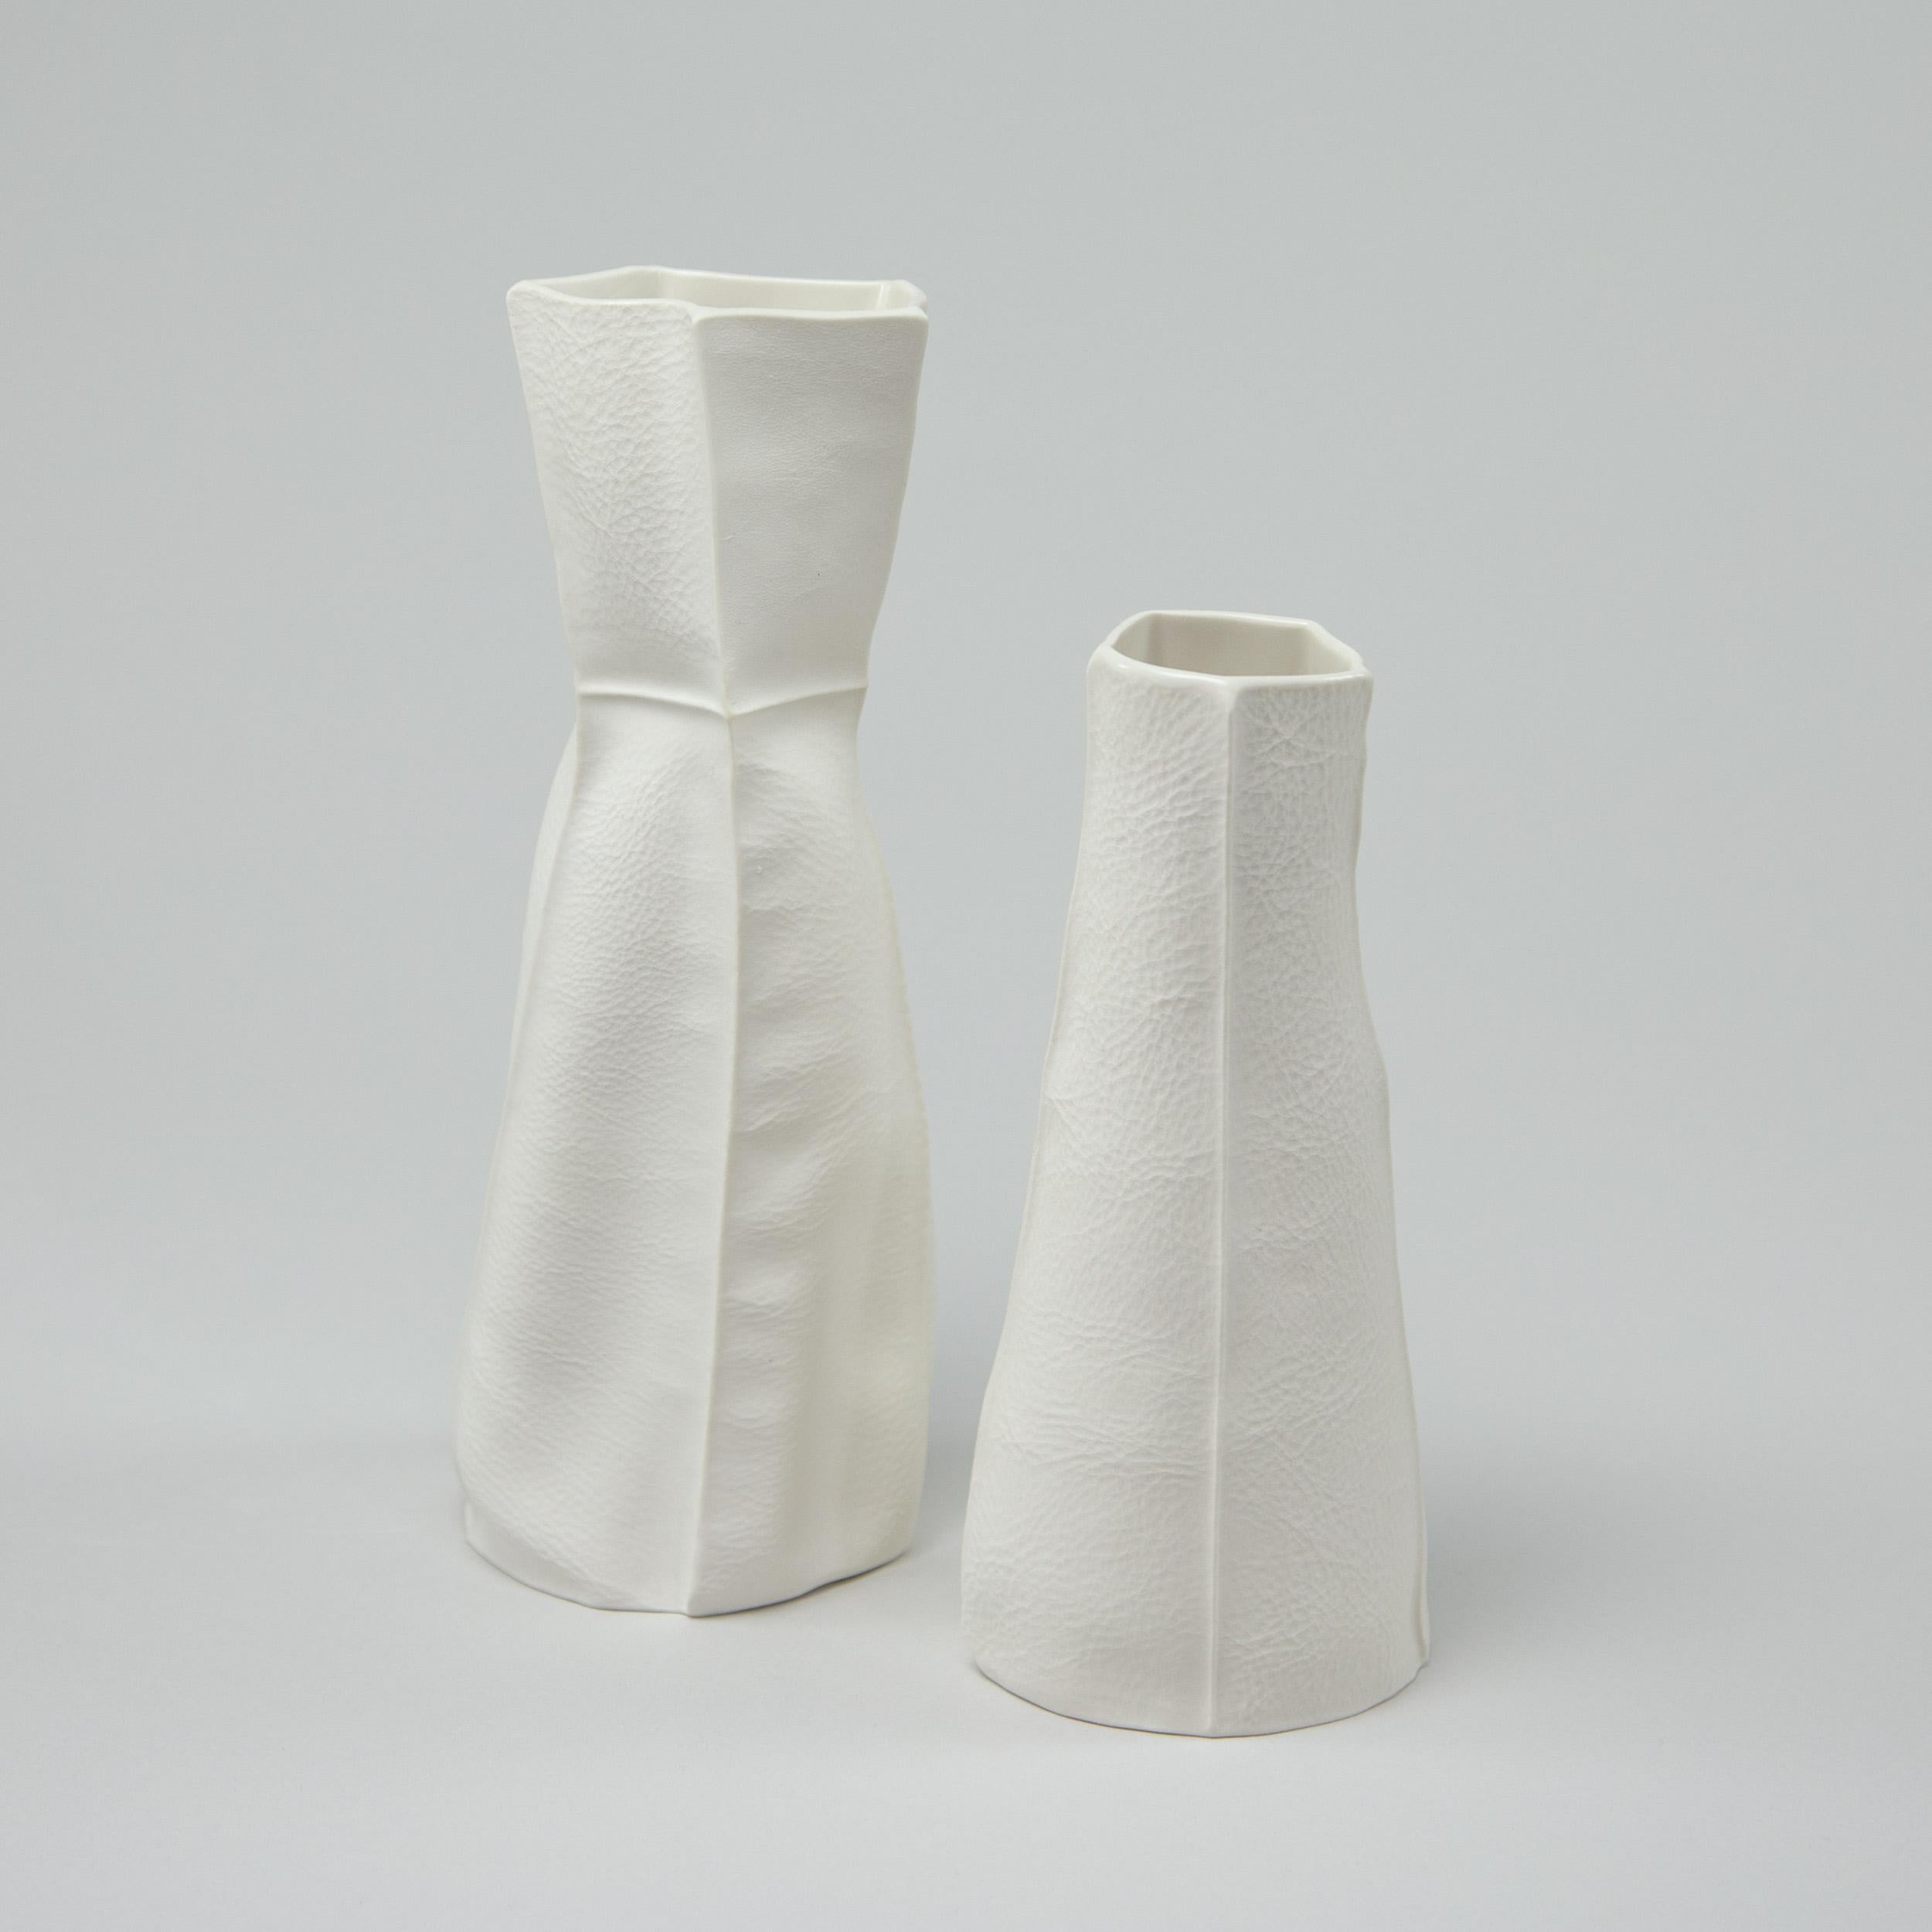 Tactile and organic porcelain vase with leather textured exterior surface and clear glazed interior. As a result of the production process each item is one-of-a-kind.

Use individually as an understated accent or in a pair or cluster for a little